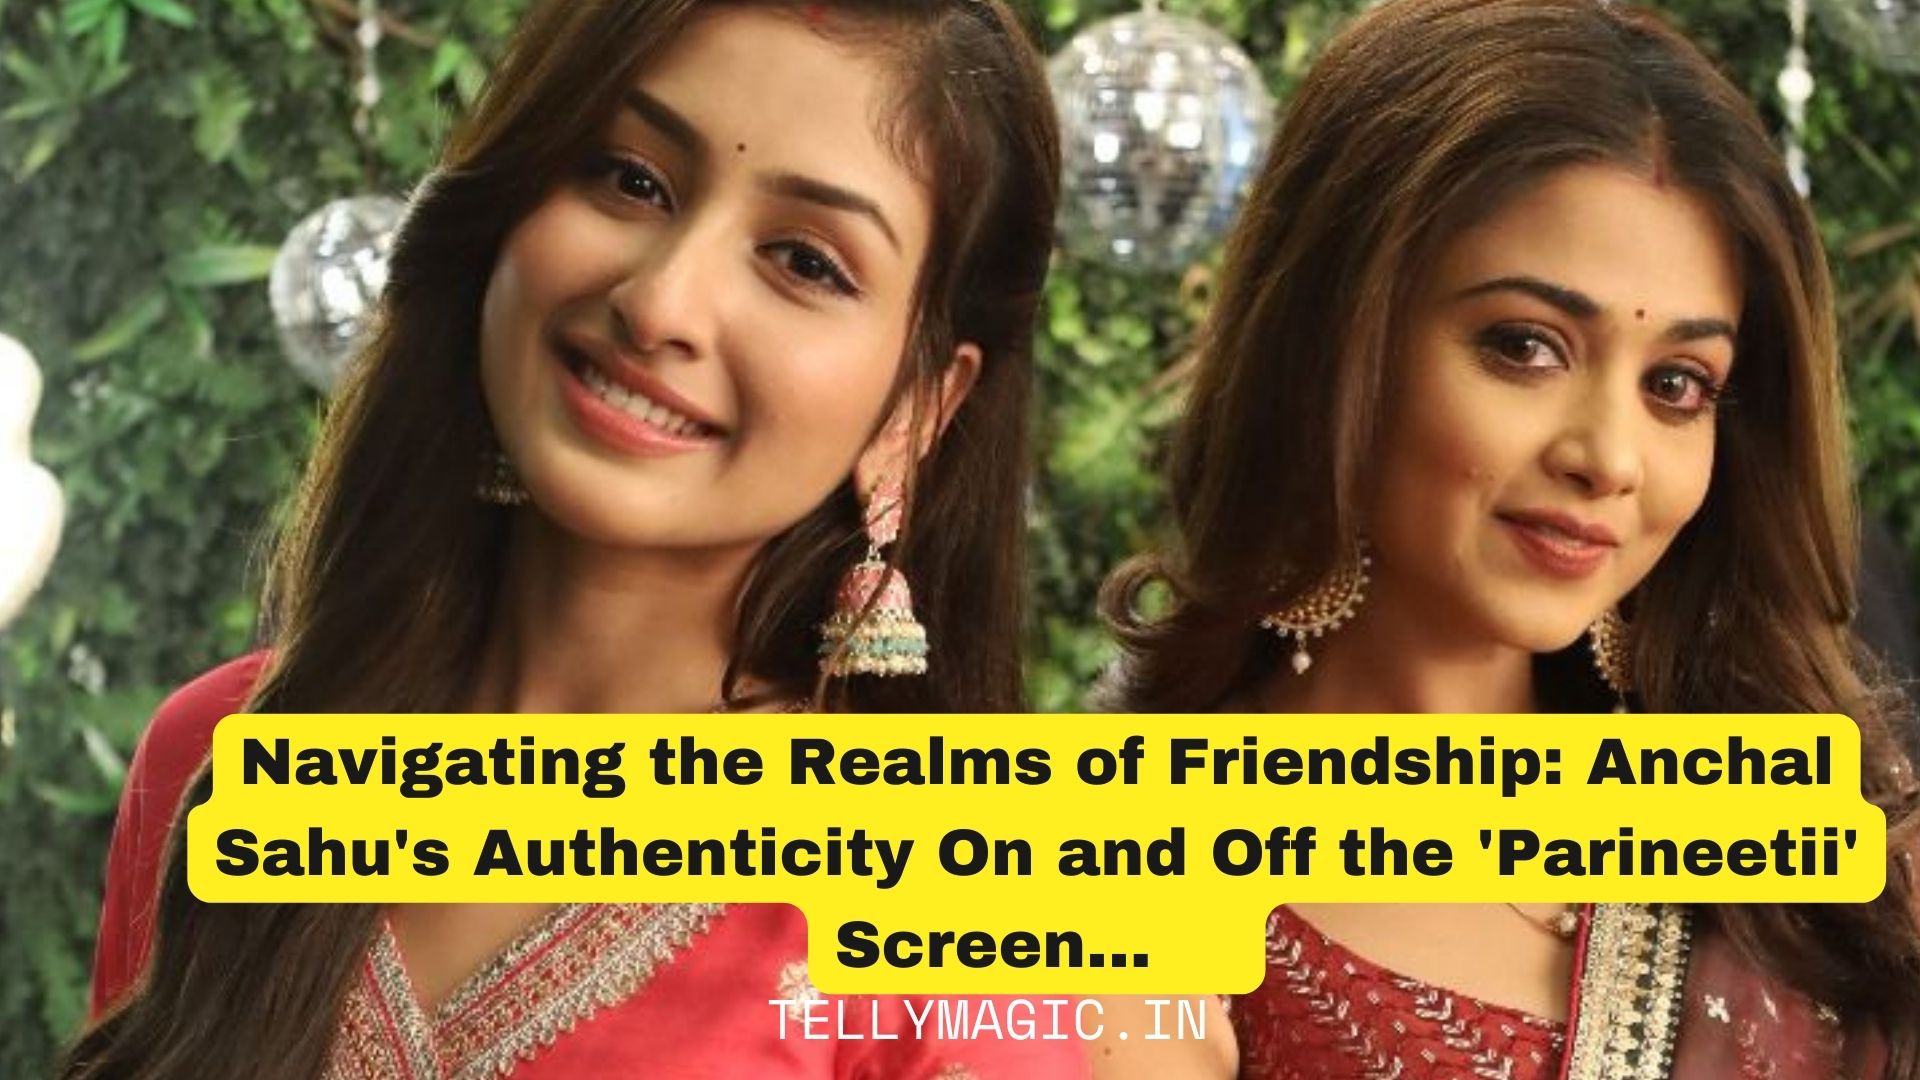 Navigating the Realms of Friendship: Anchal Sahu’s Authenticity On and Off the ‘Parineetii’ Screen